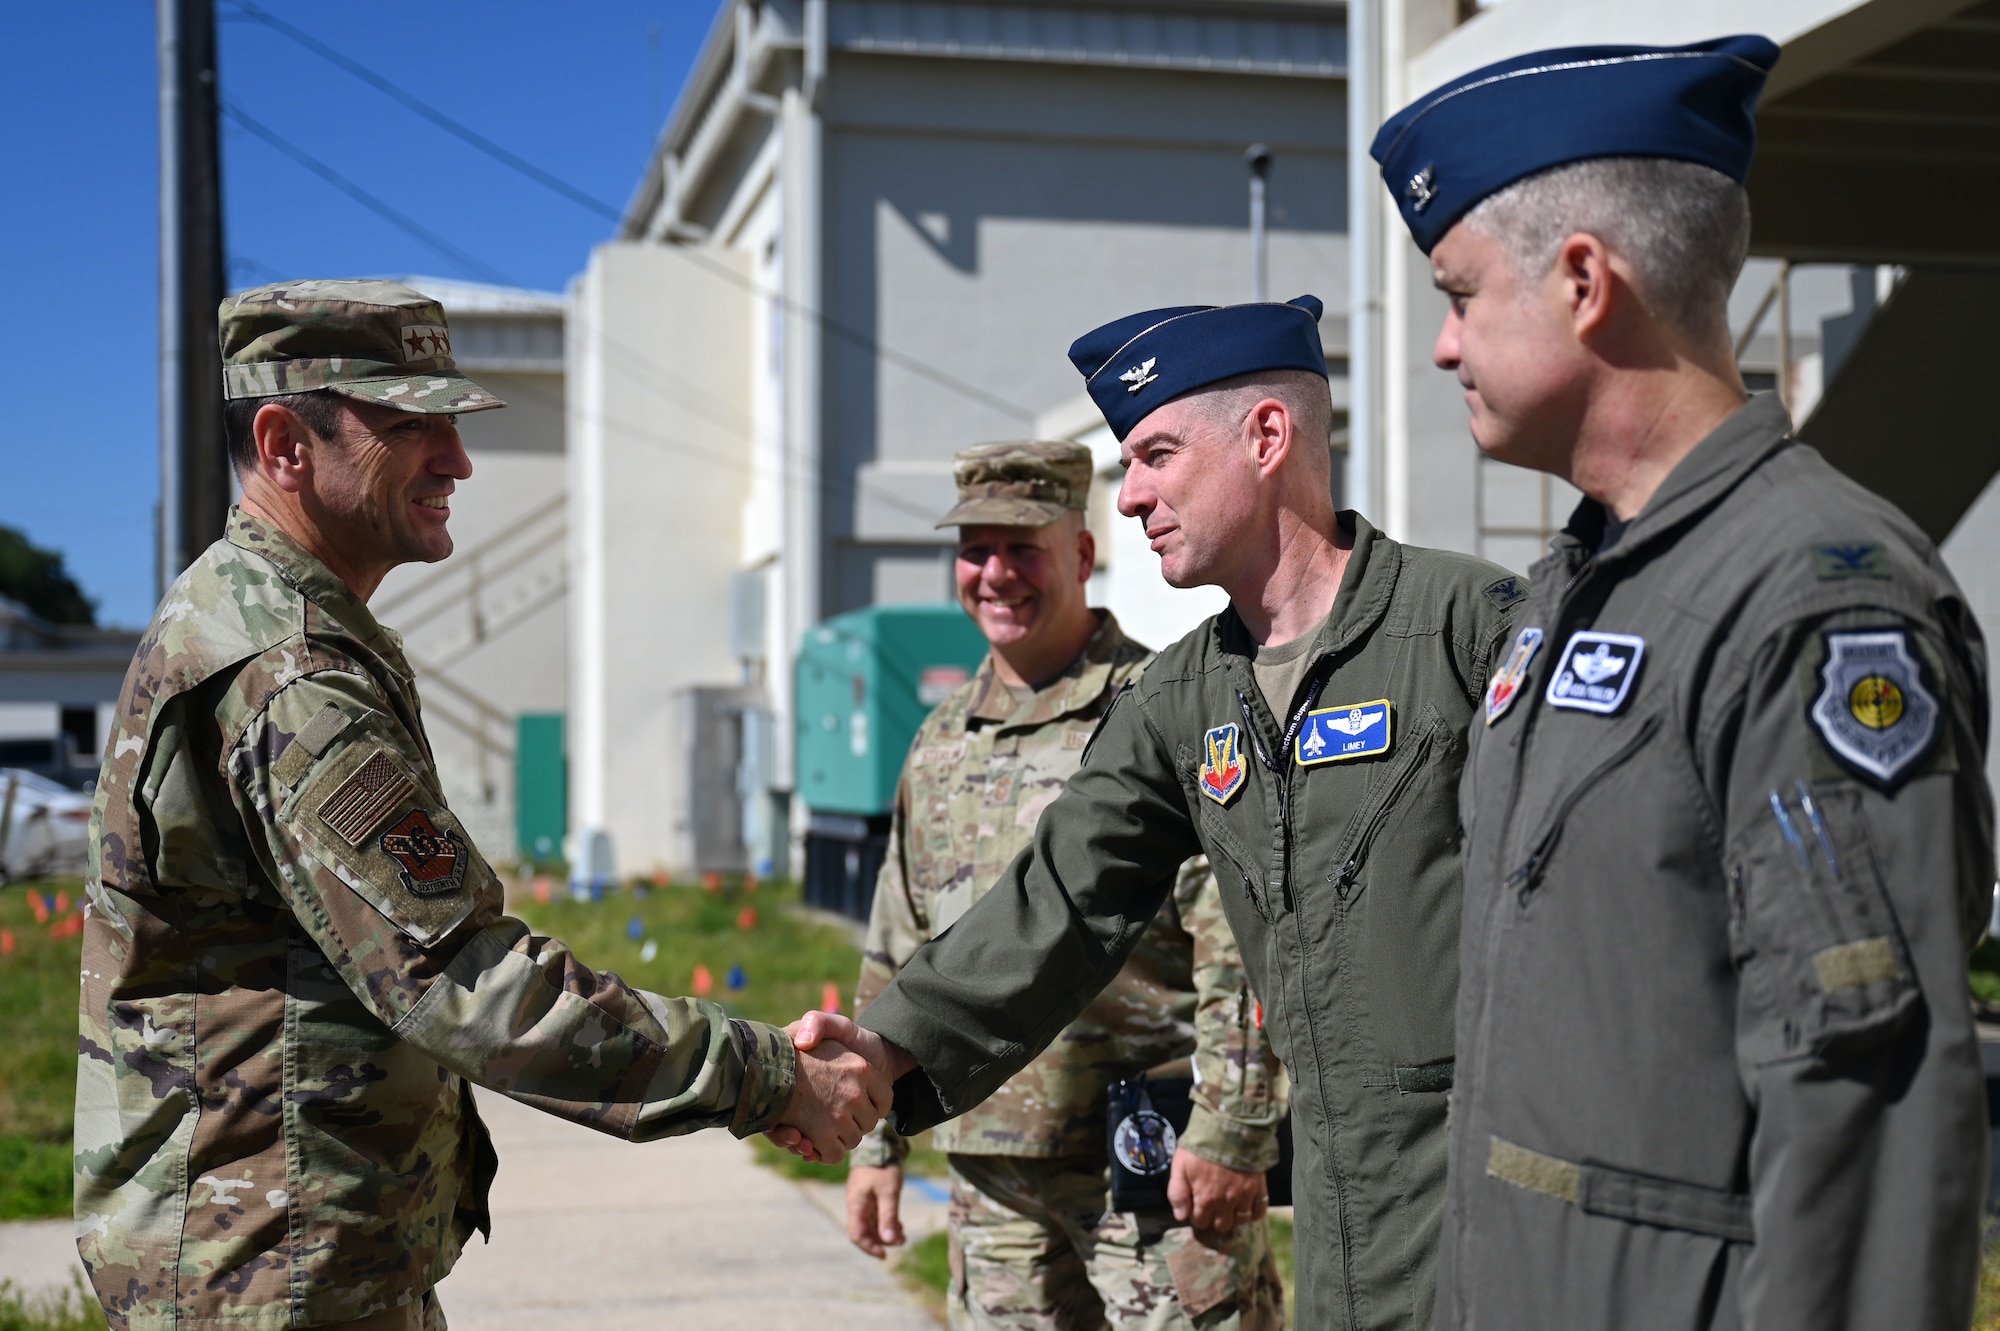 Lt. Gen. Kevin Kennedy, Commander, 16th Air Force (Air Forces Cyber), shakes hands with U.S. Air Force Col. John A. Christianson, 350th Spectrum Warfare Wing deputy commander, during a visit at Eglin Air Force Base, Fla., Nov. 3, 2023. The 350th SWW serves as the Air Force’s first Electromagnetic Spectrum (EMS) focused wing on enhancing air component commanders’ ability to synchronize, integrate and execute EMS capabilities across all domains and platforms. (U.S. Air Force photo by Staff Sgt. Ericka A. Woolever)